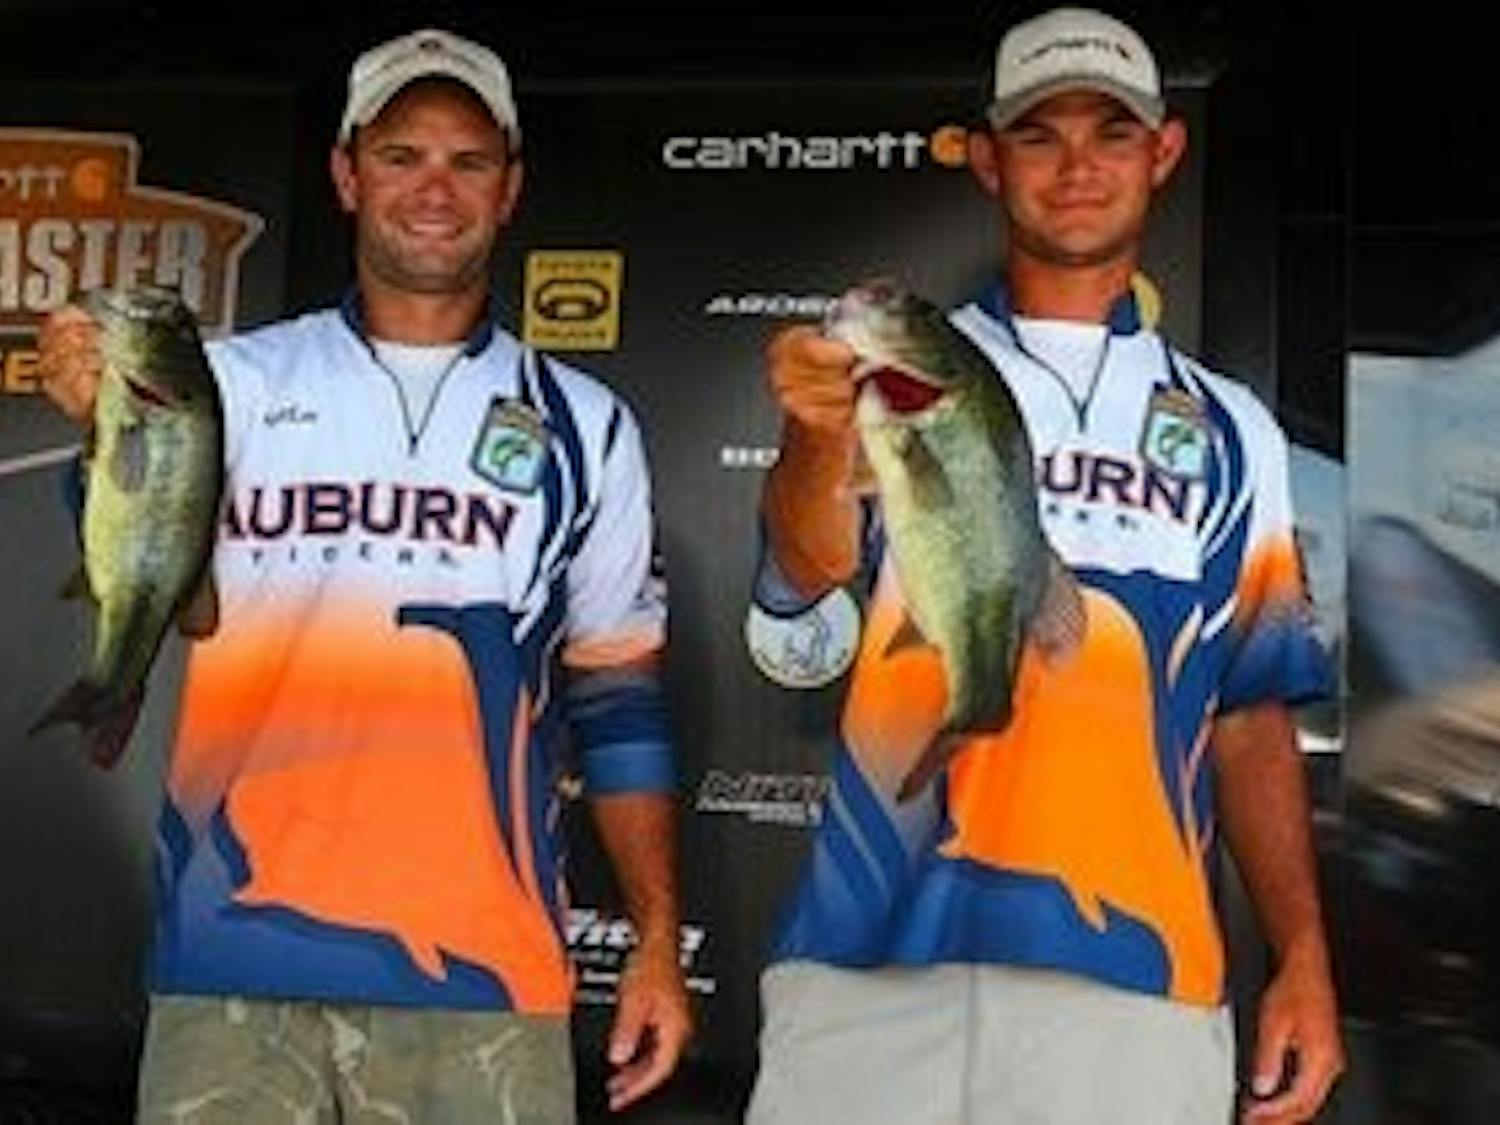 Brothers Matt Lee (left) and Jordan Lee (right) competed in the Carhartt College Series in Little Rock, Ark. last week where Matt qualified to move on to the Classic, a national competition. (Courtesy of auburn.edu)